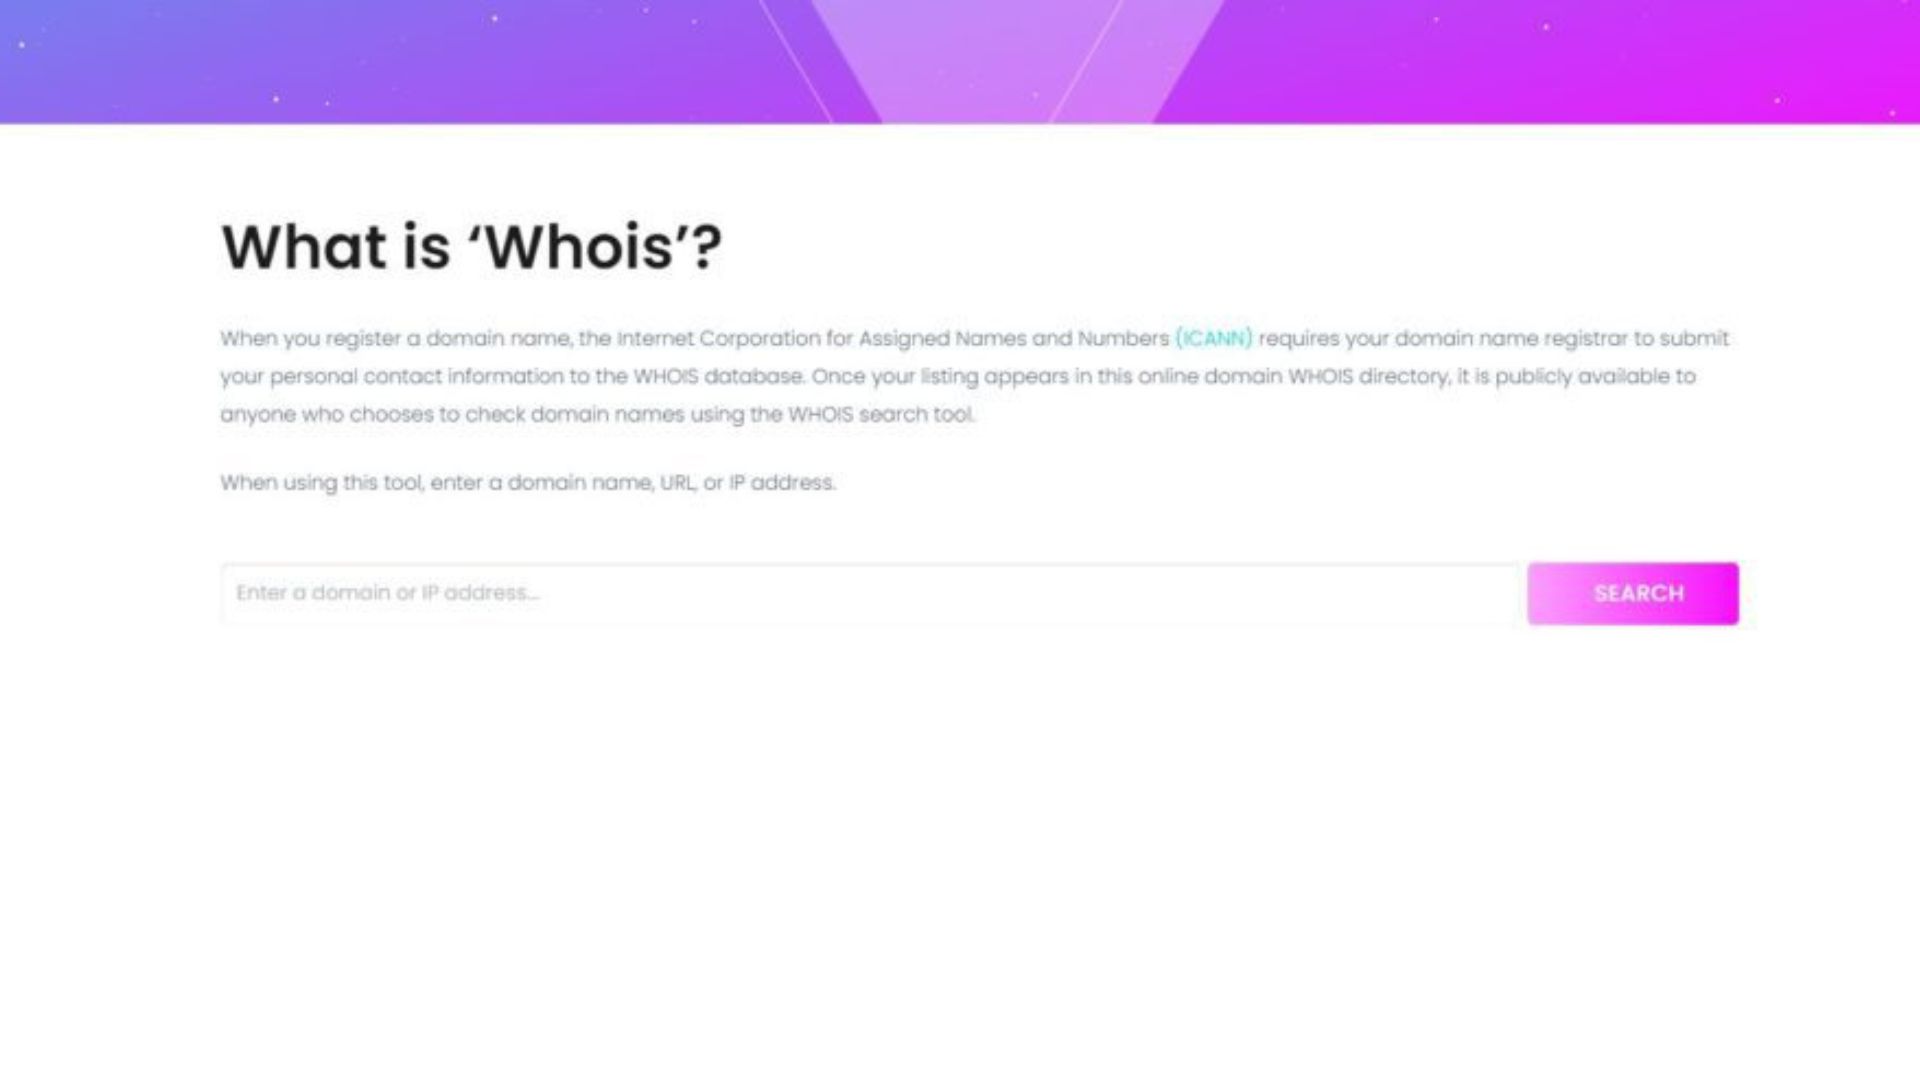 Who is WHOIS?